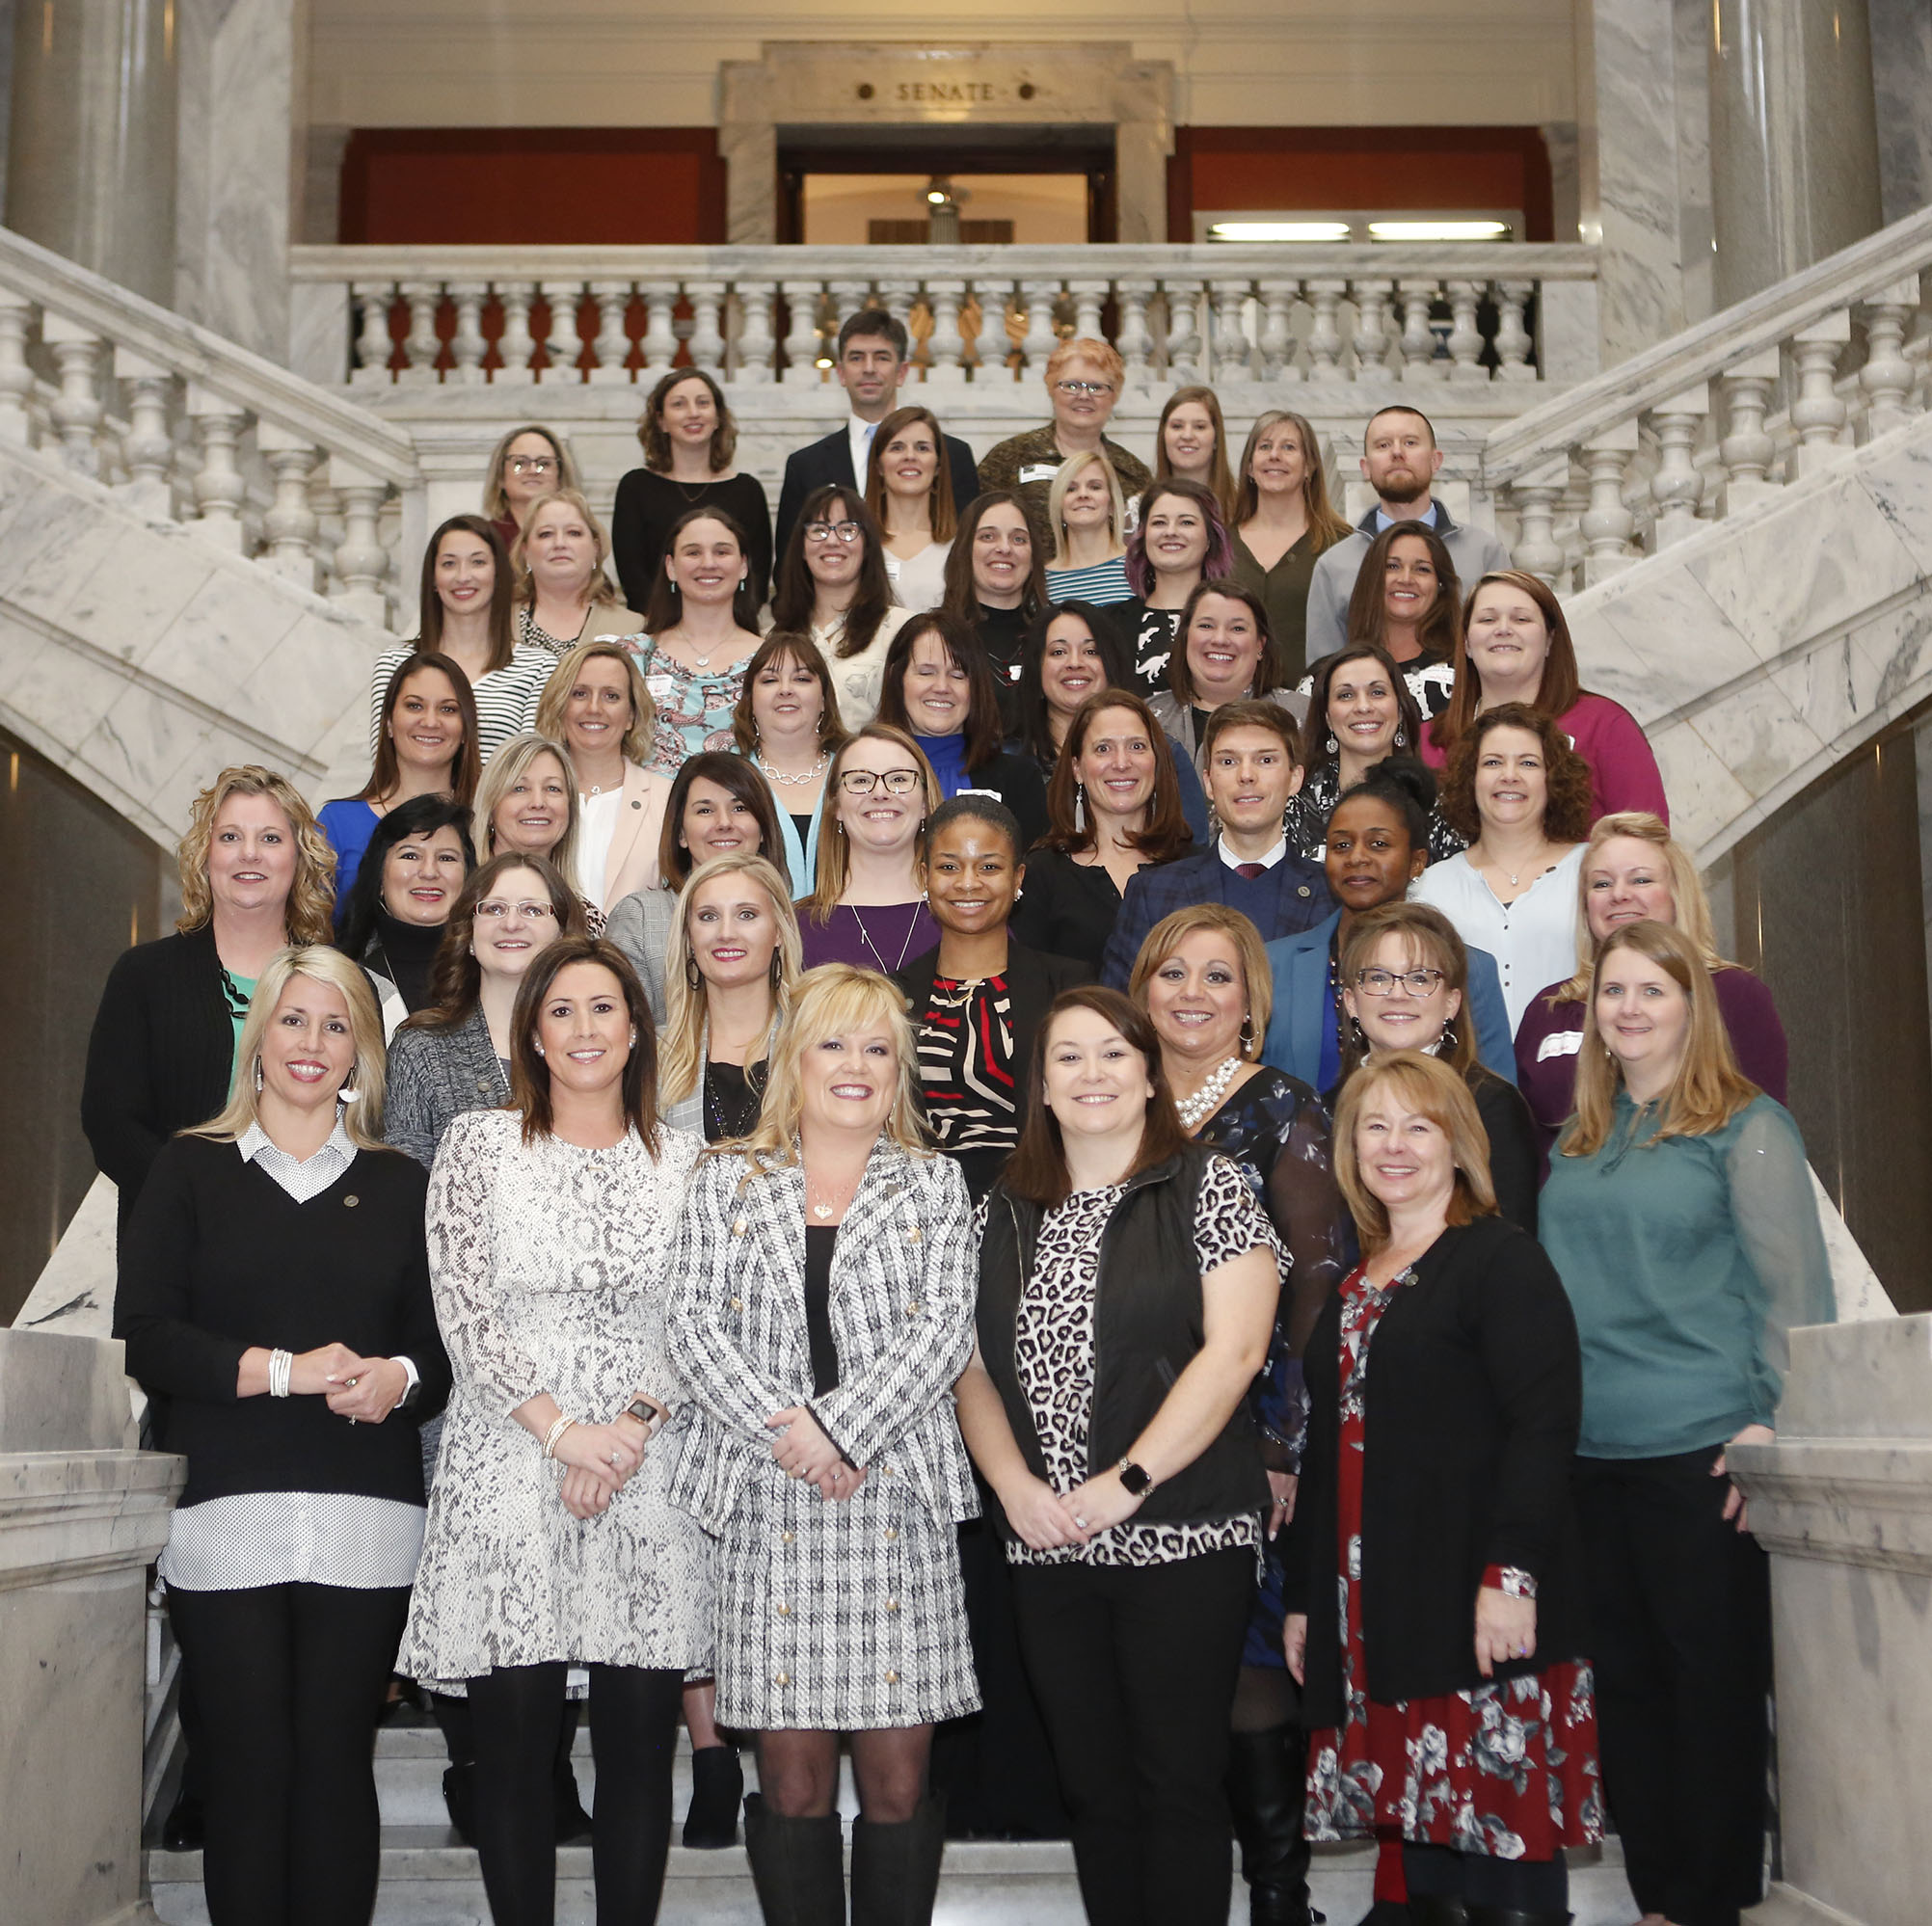 Some of the 219 Kentucky educators who make up the most recent class of National Board Certified Teachers pose for a photo at the Kentucky State Capitol. Photo by Mike Marsee, Feb. 11, 2020